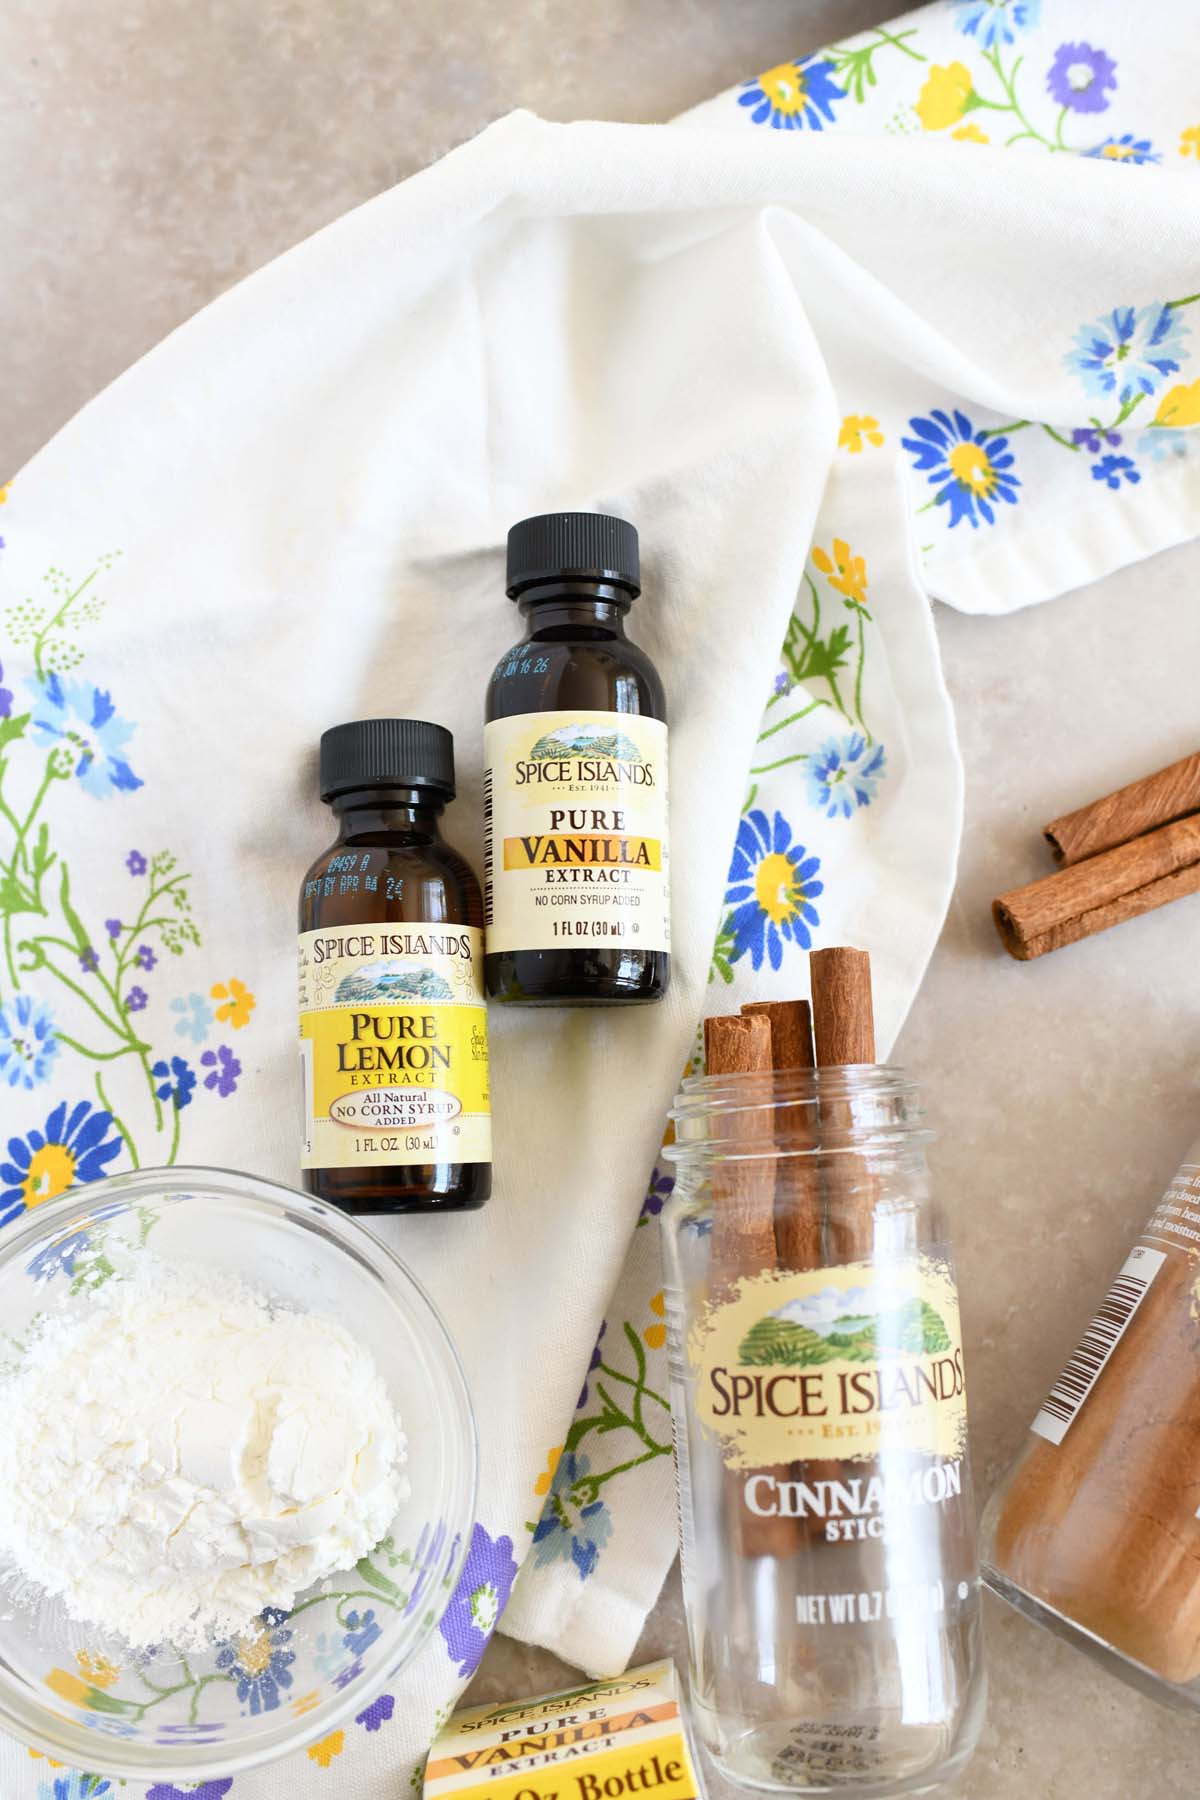 Spice Islands products on a white flowery napkin.